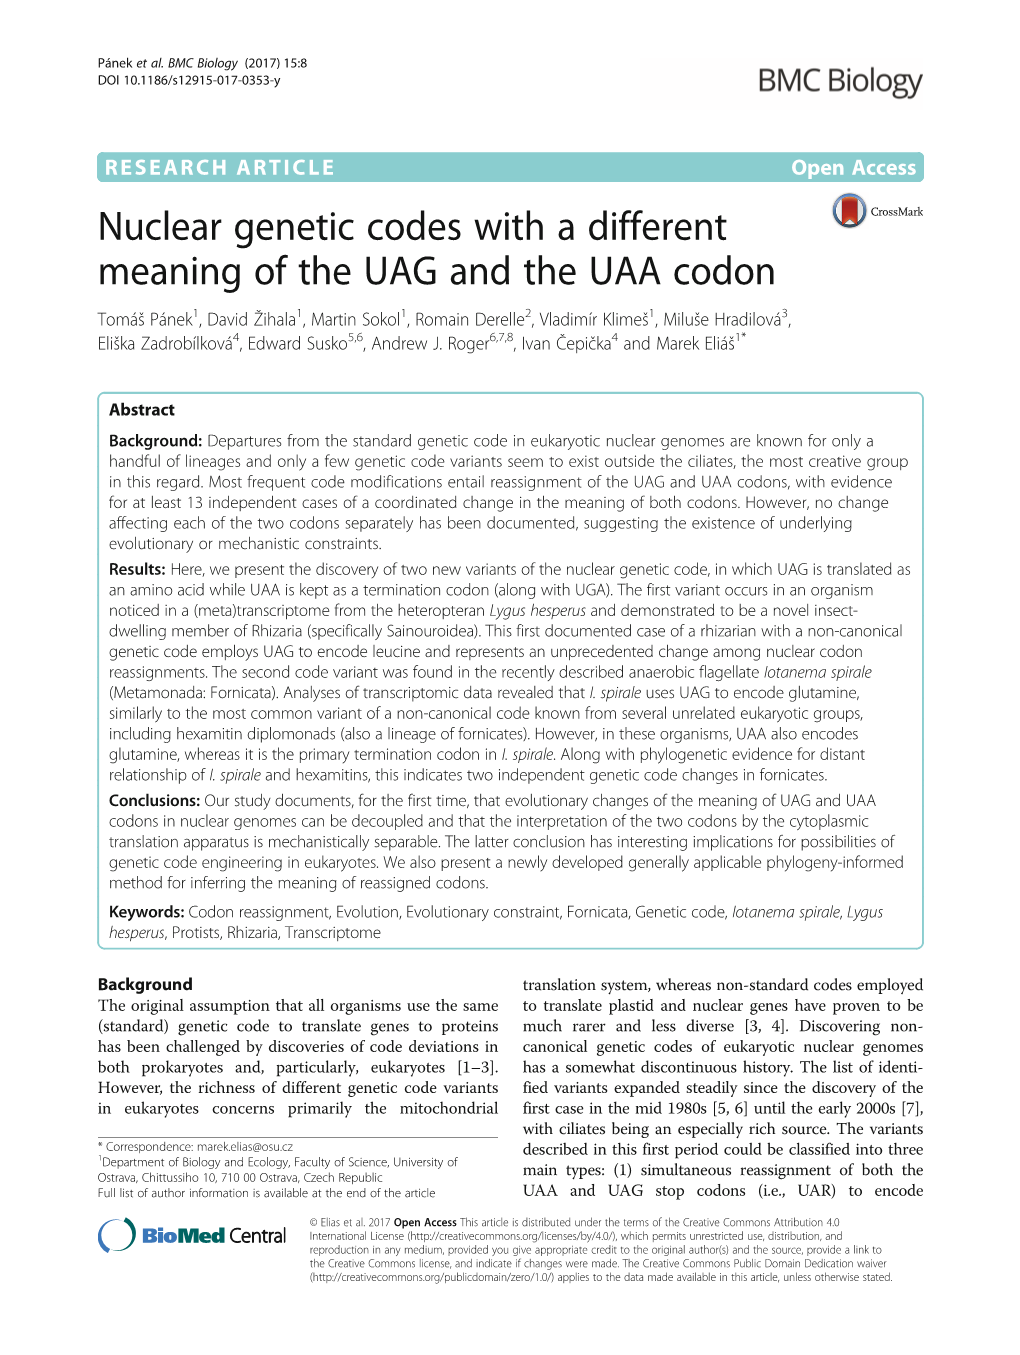 Nuclear Genetic Codes with a Different Meaning of the UAG and the UAA